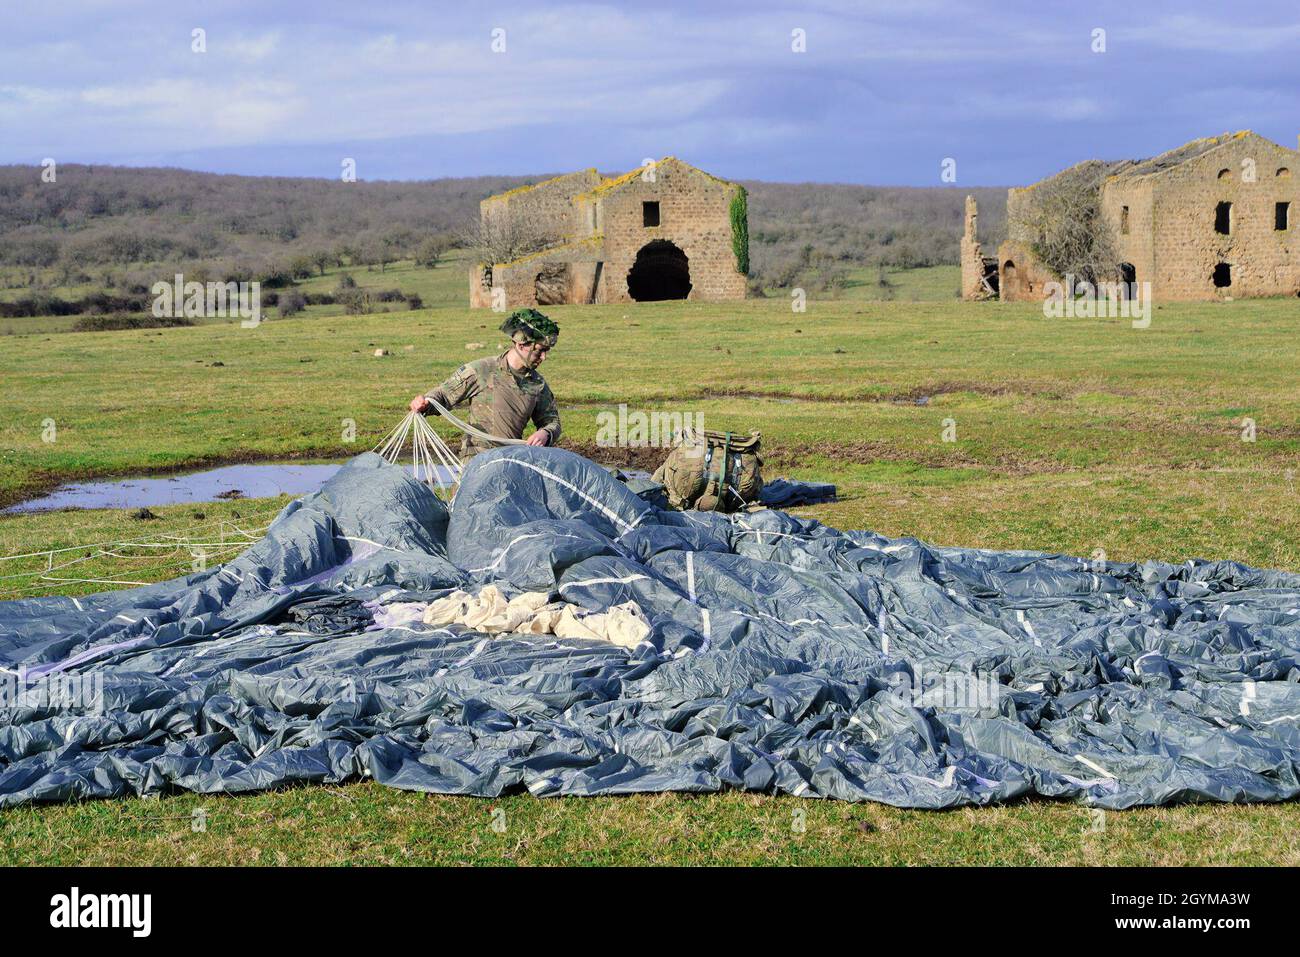 A U.S. Army paratrooper from HHC, 2nd Battalion, 503rd  Infantry Regiment, 173rd Airborne Brigade recovers his parachute after the airborne operation  during Exercise Rock Topside 20, Monte Romano, Italy, Jan. 29, 2020. Rock Topside is a joint forced entry exercise to train the battalion’s ability to conduct airborne contingency response force operations. This training stresses the interoperability of both the paratroopers of the 2nd Battalion, 503rd Infantry Regiment and Italian paratroopers of Reggimento Savoia Cavalleria 3. (U.S Army photo by Elena Baladelli) Stock Photo